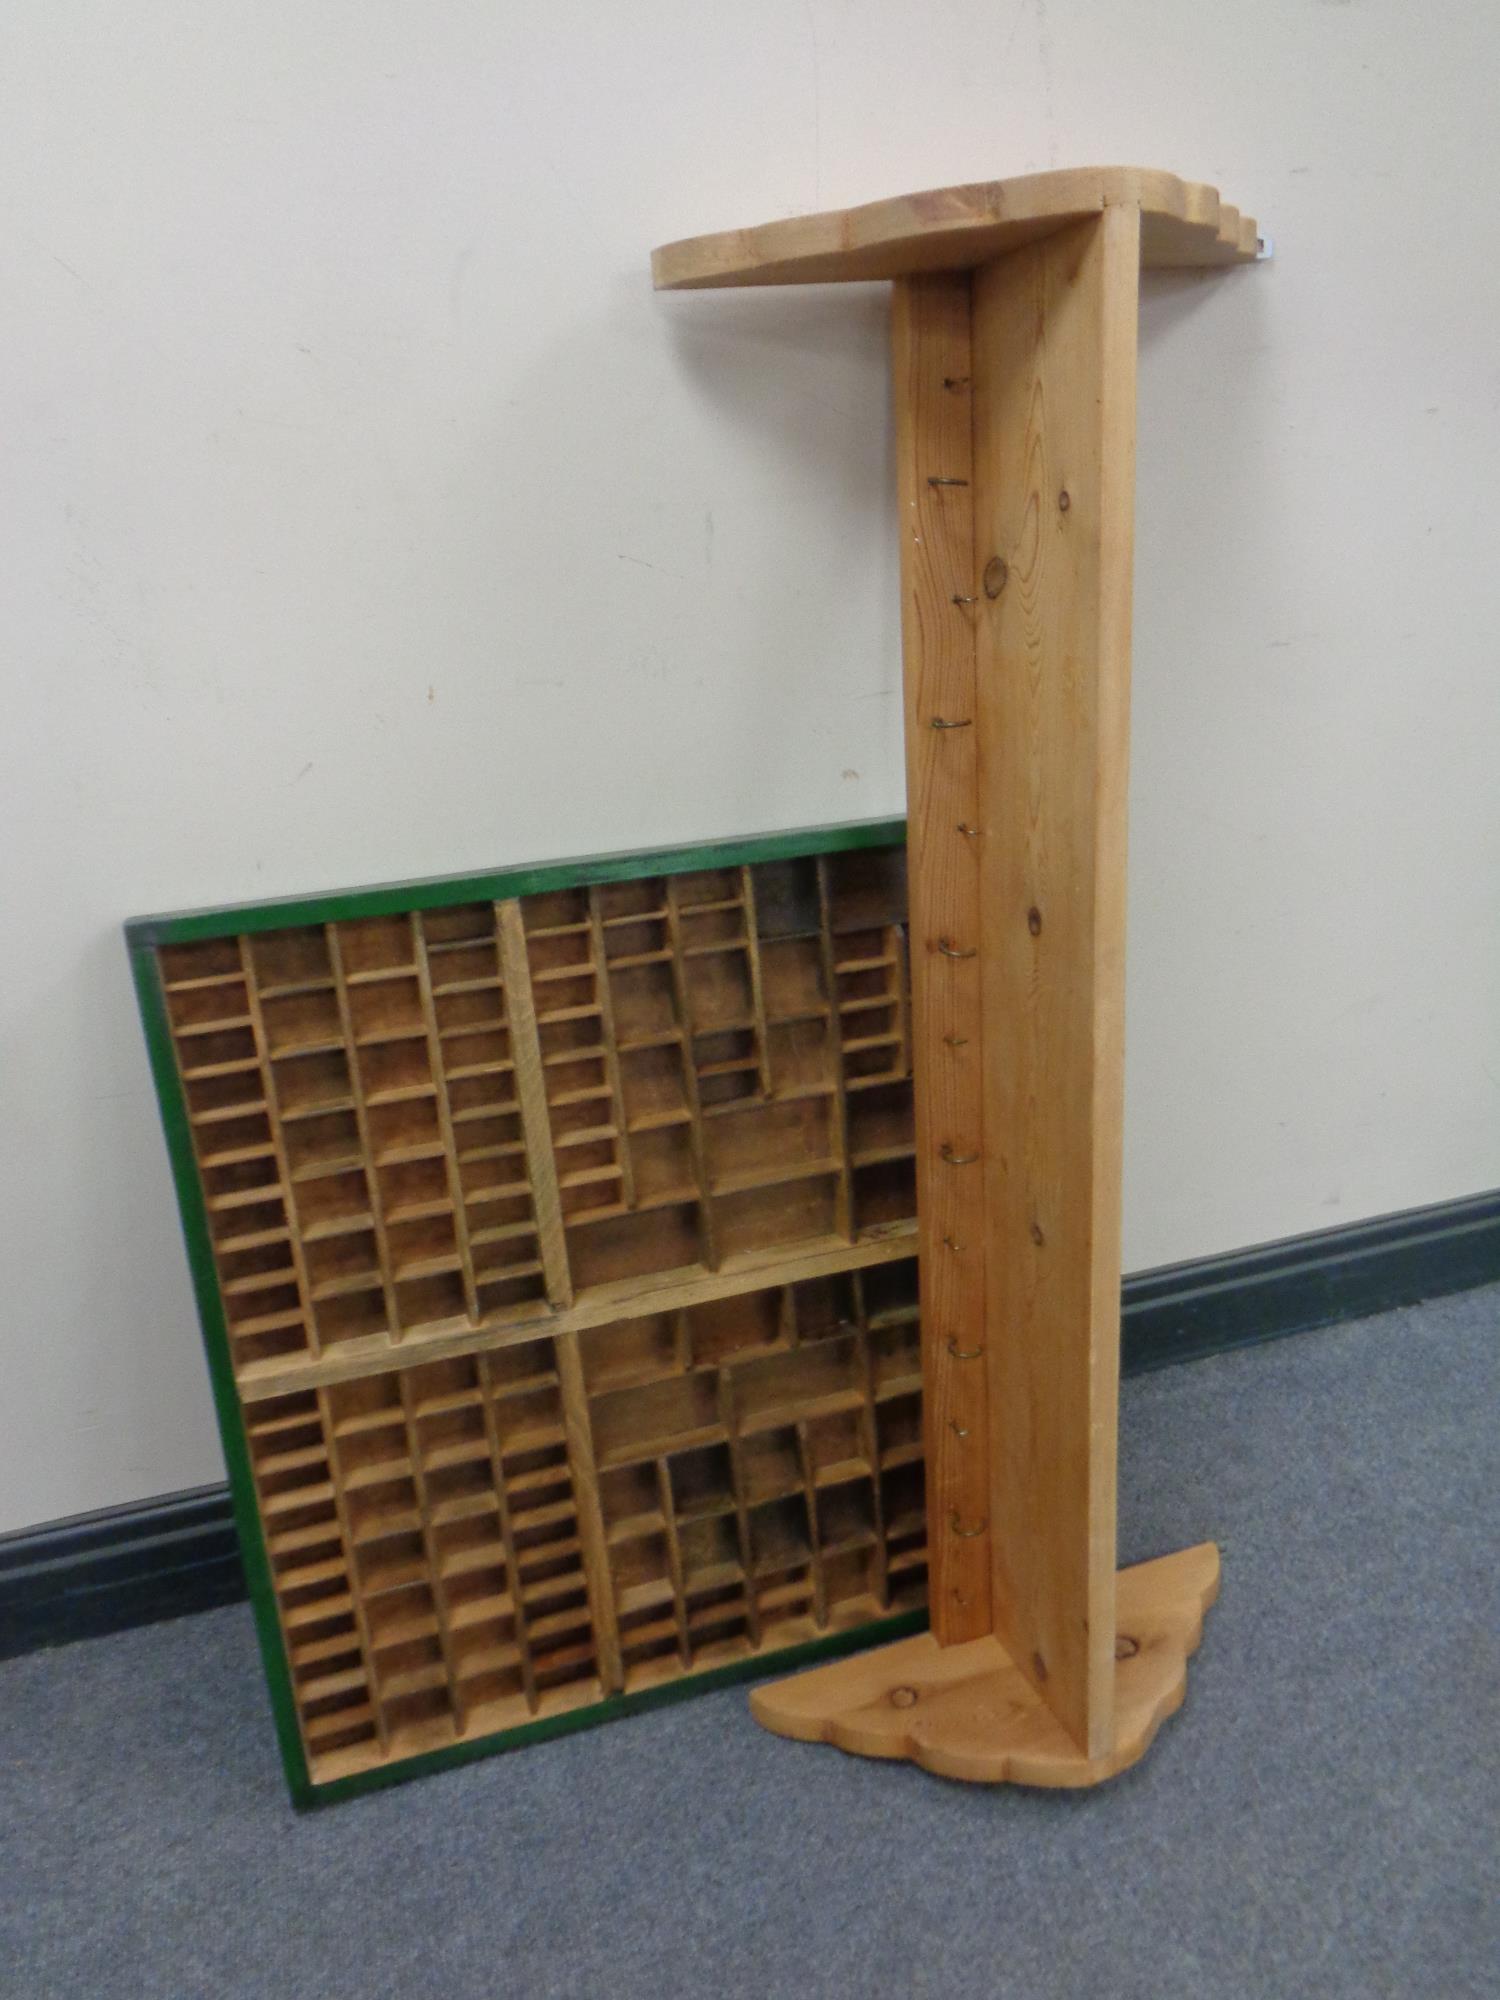 A pine coat rack together with a printer's type tray